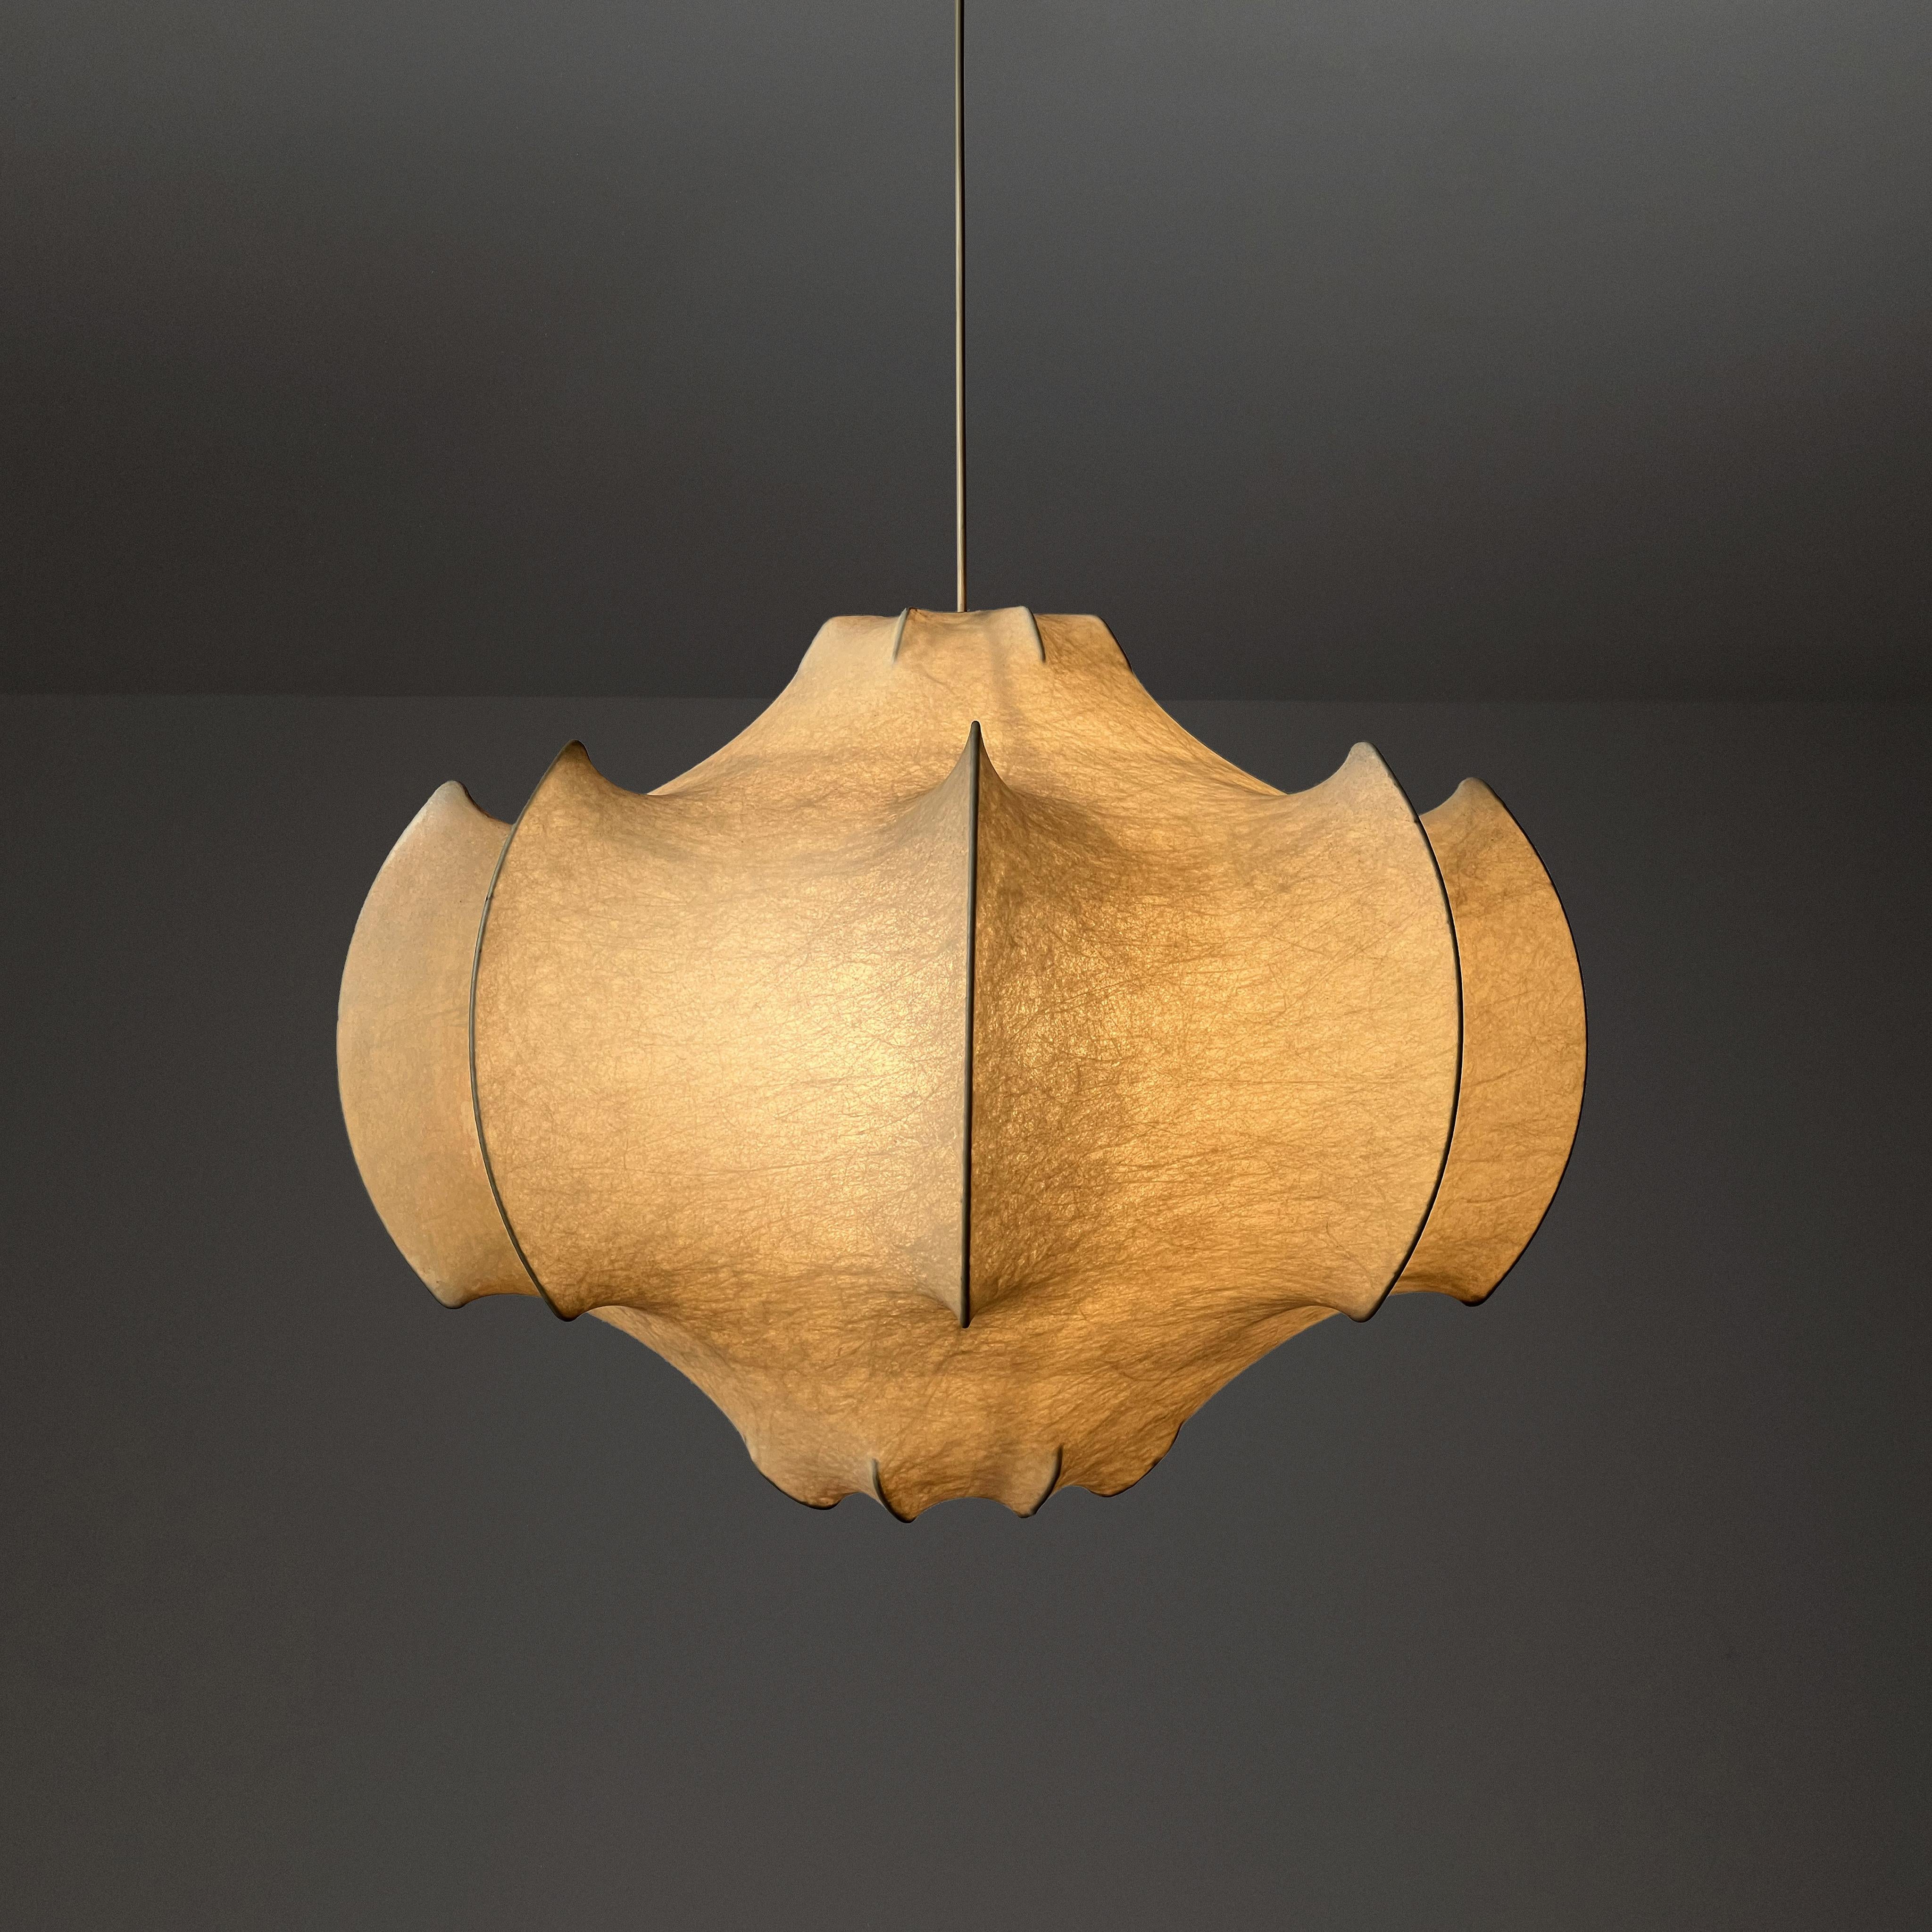 Crafted during the 1960s, this chandelier stands as a hallmark of Italian design, blending contemporary shapes with an organic, almost playful charm, sure to infuse any space with an aura of elegance and delight.

The 